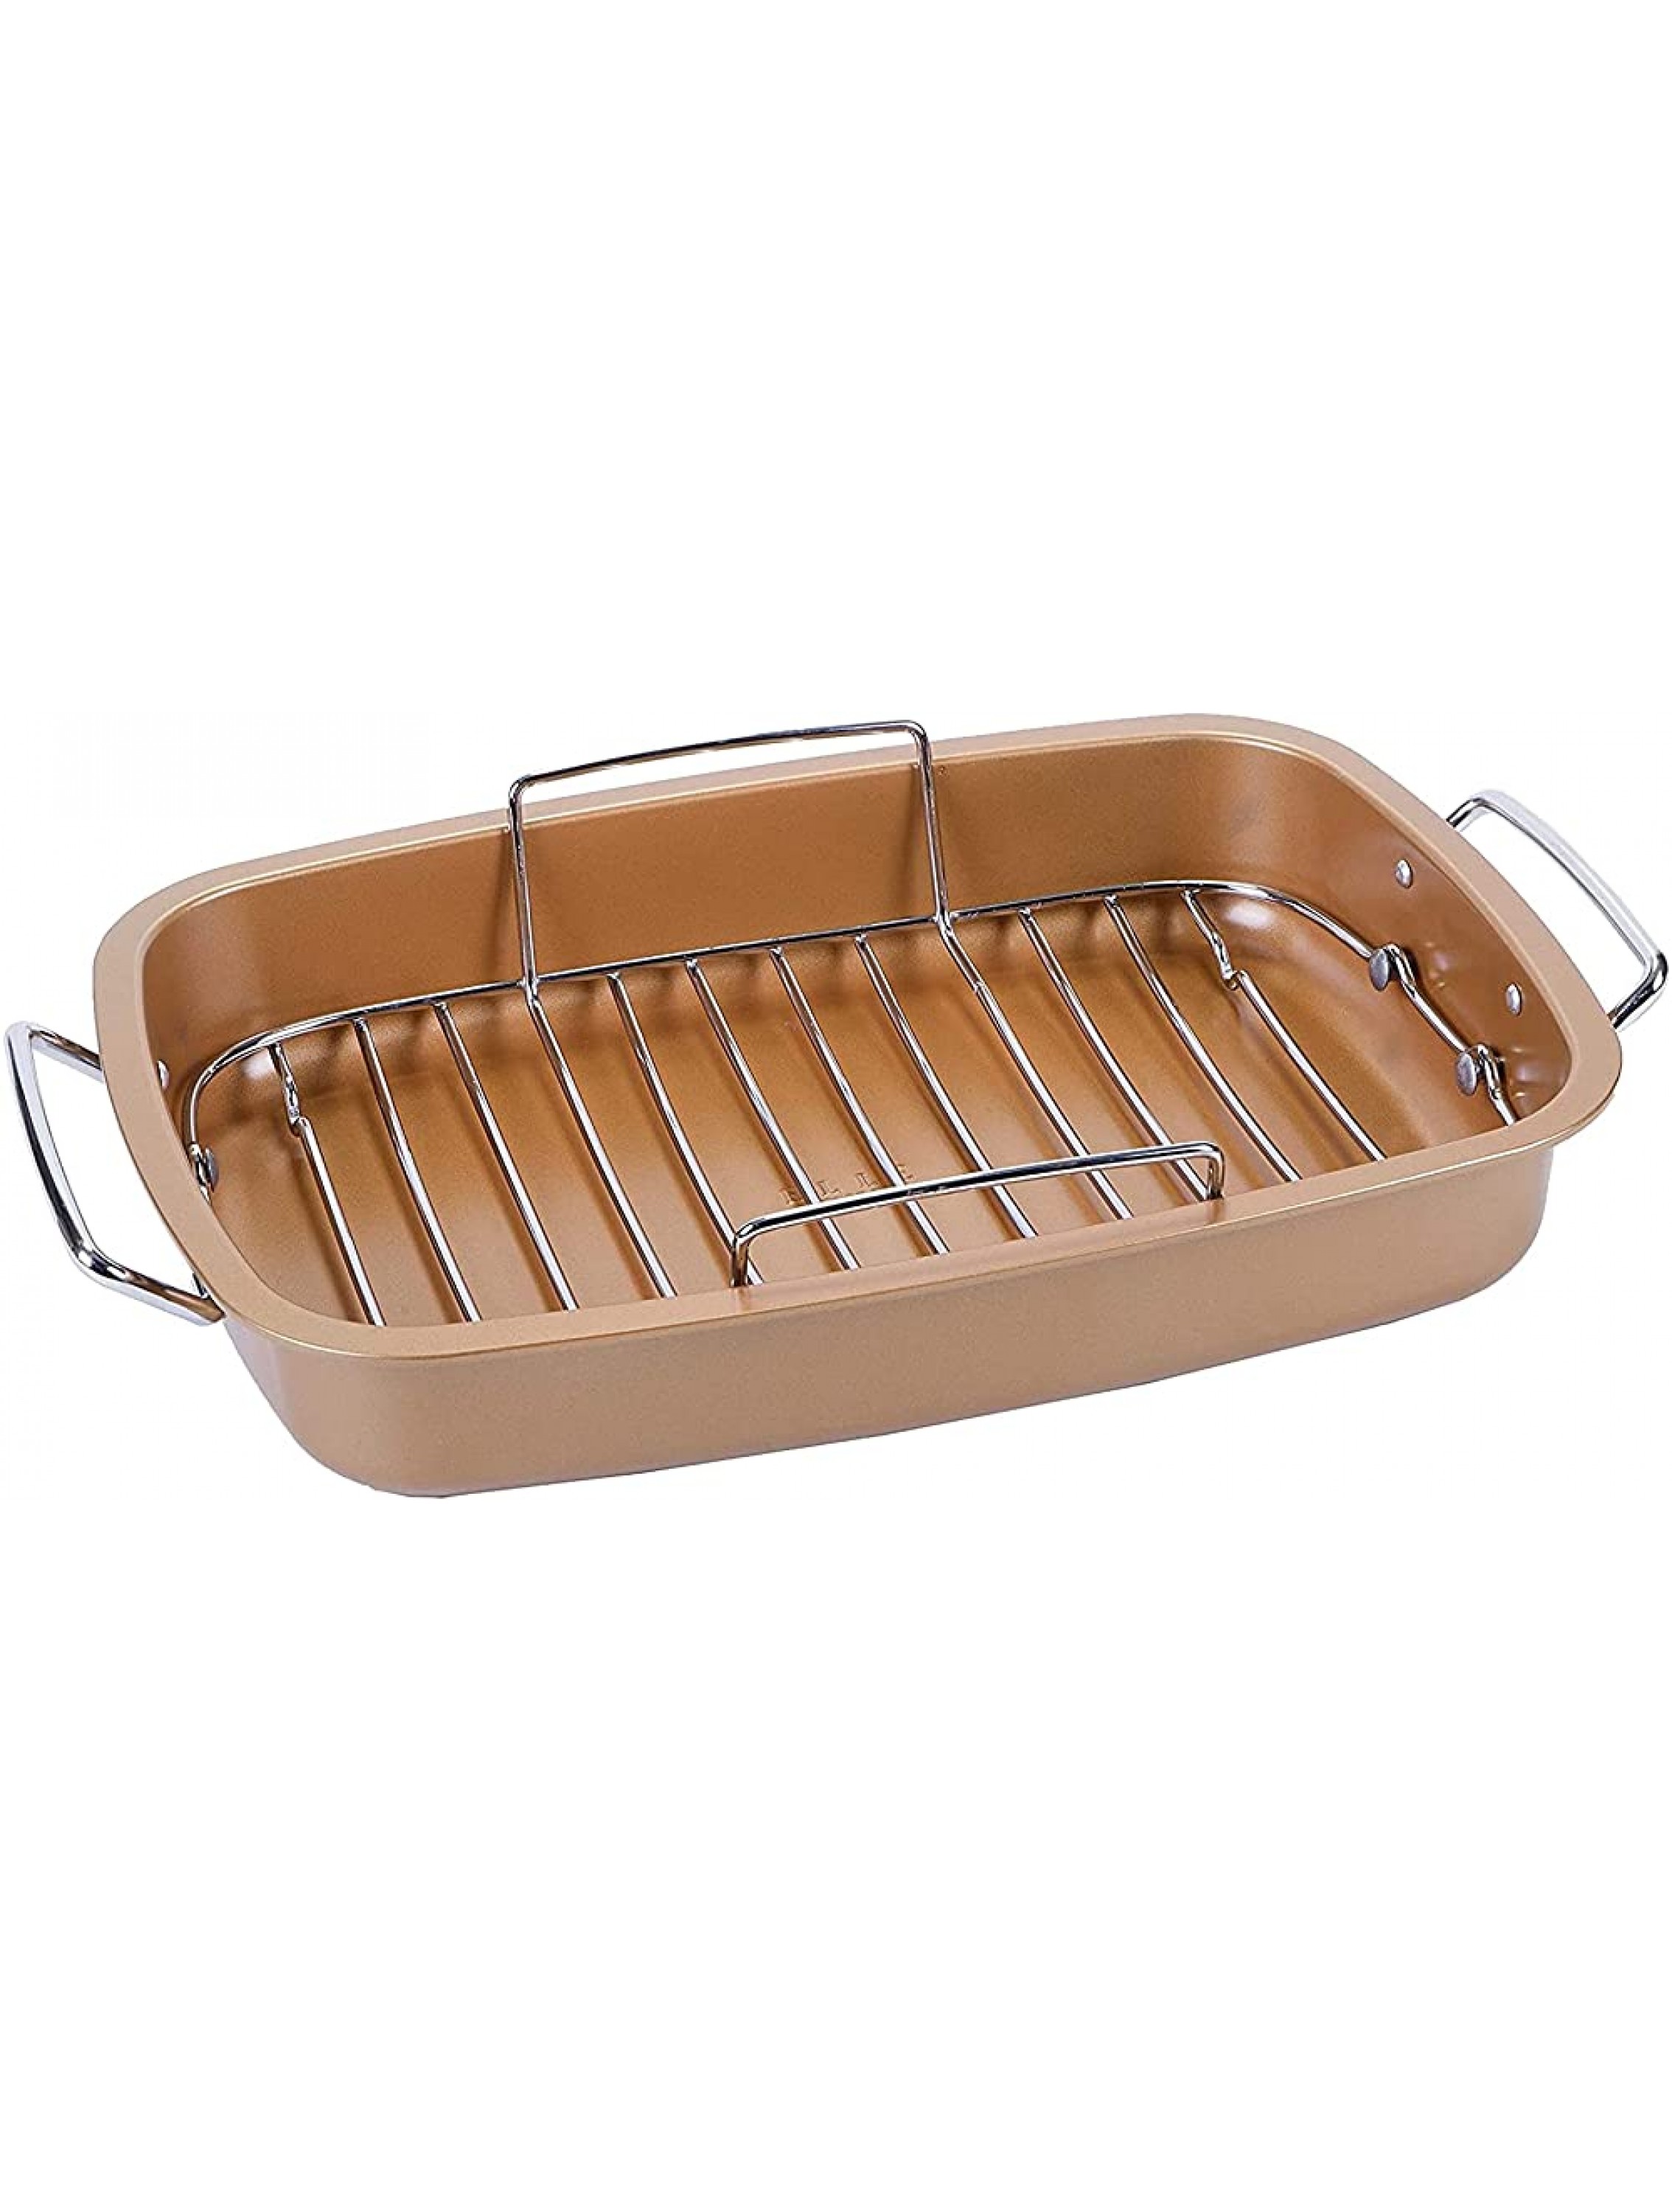 Heavy Gauge Carbonized Steel Commercial Kitchen Grade Copper Non-Stick Roaster with Chrome Floating Rack for 22 lb Turkey by Elle Gourmet - B14U372M3